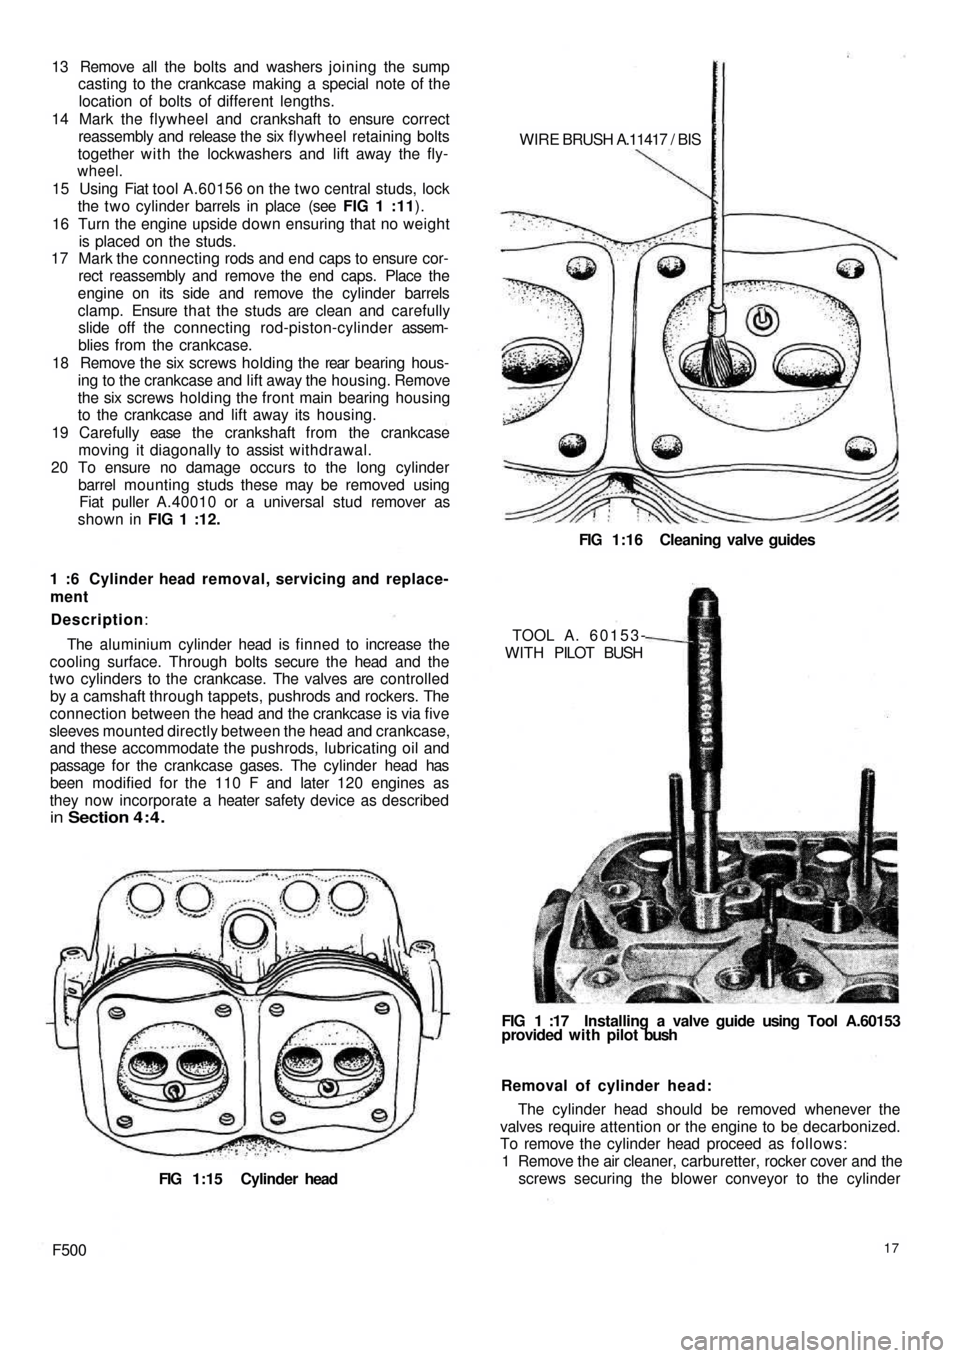 FIAT 500 1959 1.G Workshop Manual 13  Remove all the bolts and washers joining the sump
casting to the crankcase making a special note of the
location of bolts of different lengths.
14 Mark the flywheel and crankshaft to ensure correc